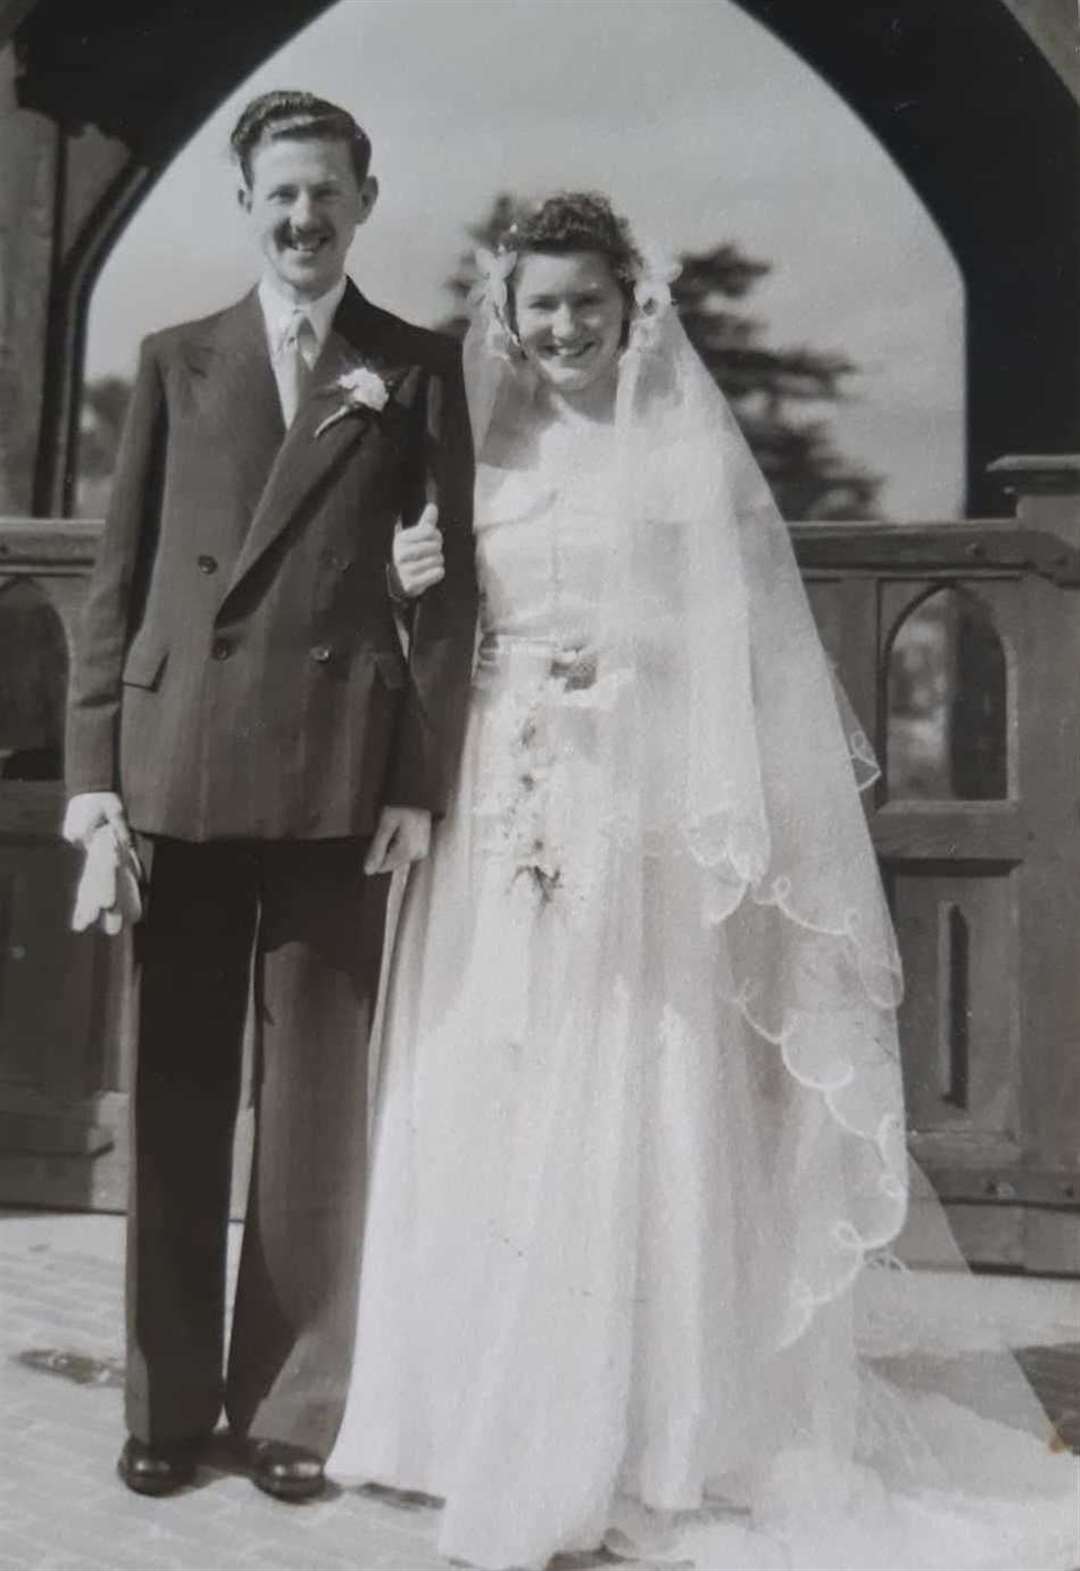 Geoff and Betty Cloke, from Longfield, on their wedding day at St Peter and St Paul Church Swanscombe on August 19, 1950